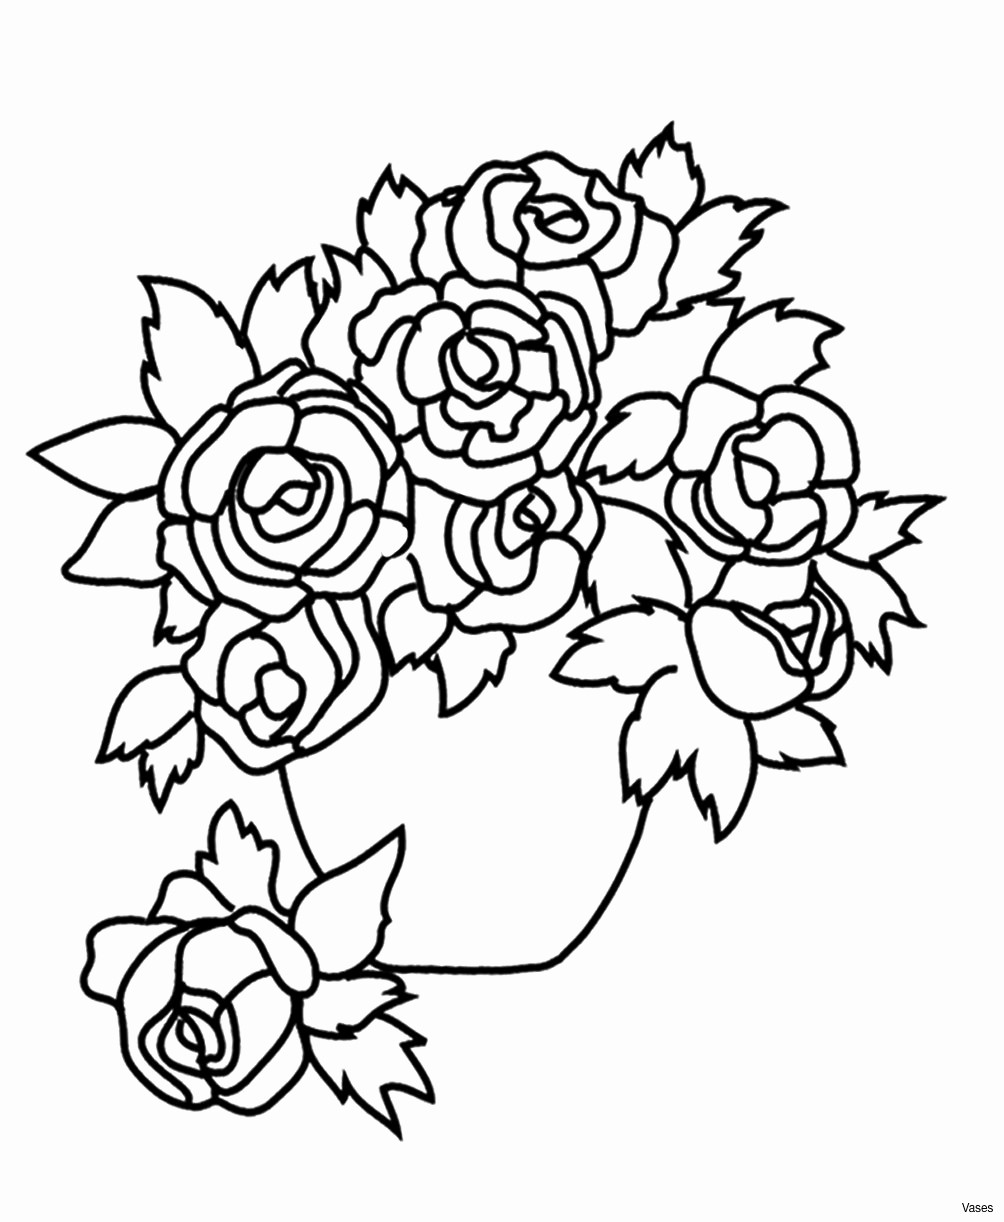 20 Amazing Long Flowers for Vases 2024 free download long flowers for vases of cinderella color page elegant vases flowers in vase coloring pages a in cinderella color page elegant vases flowers in vase coloring pages a flower top i 0d flowers